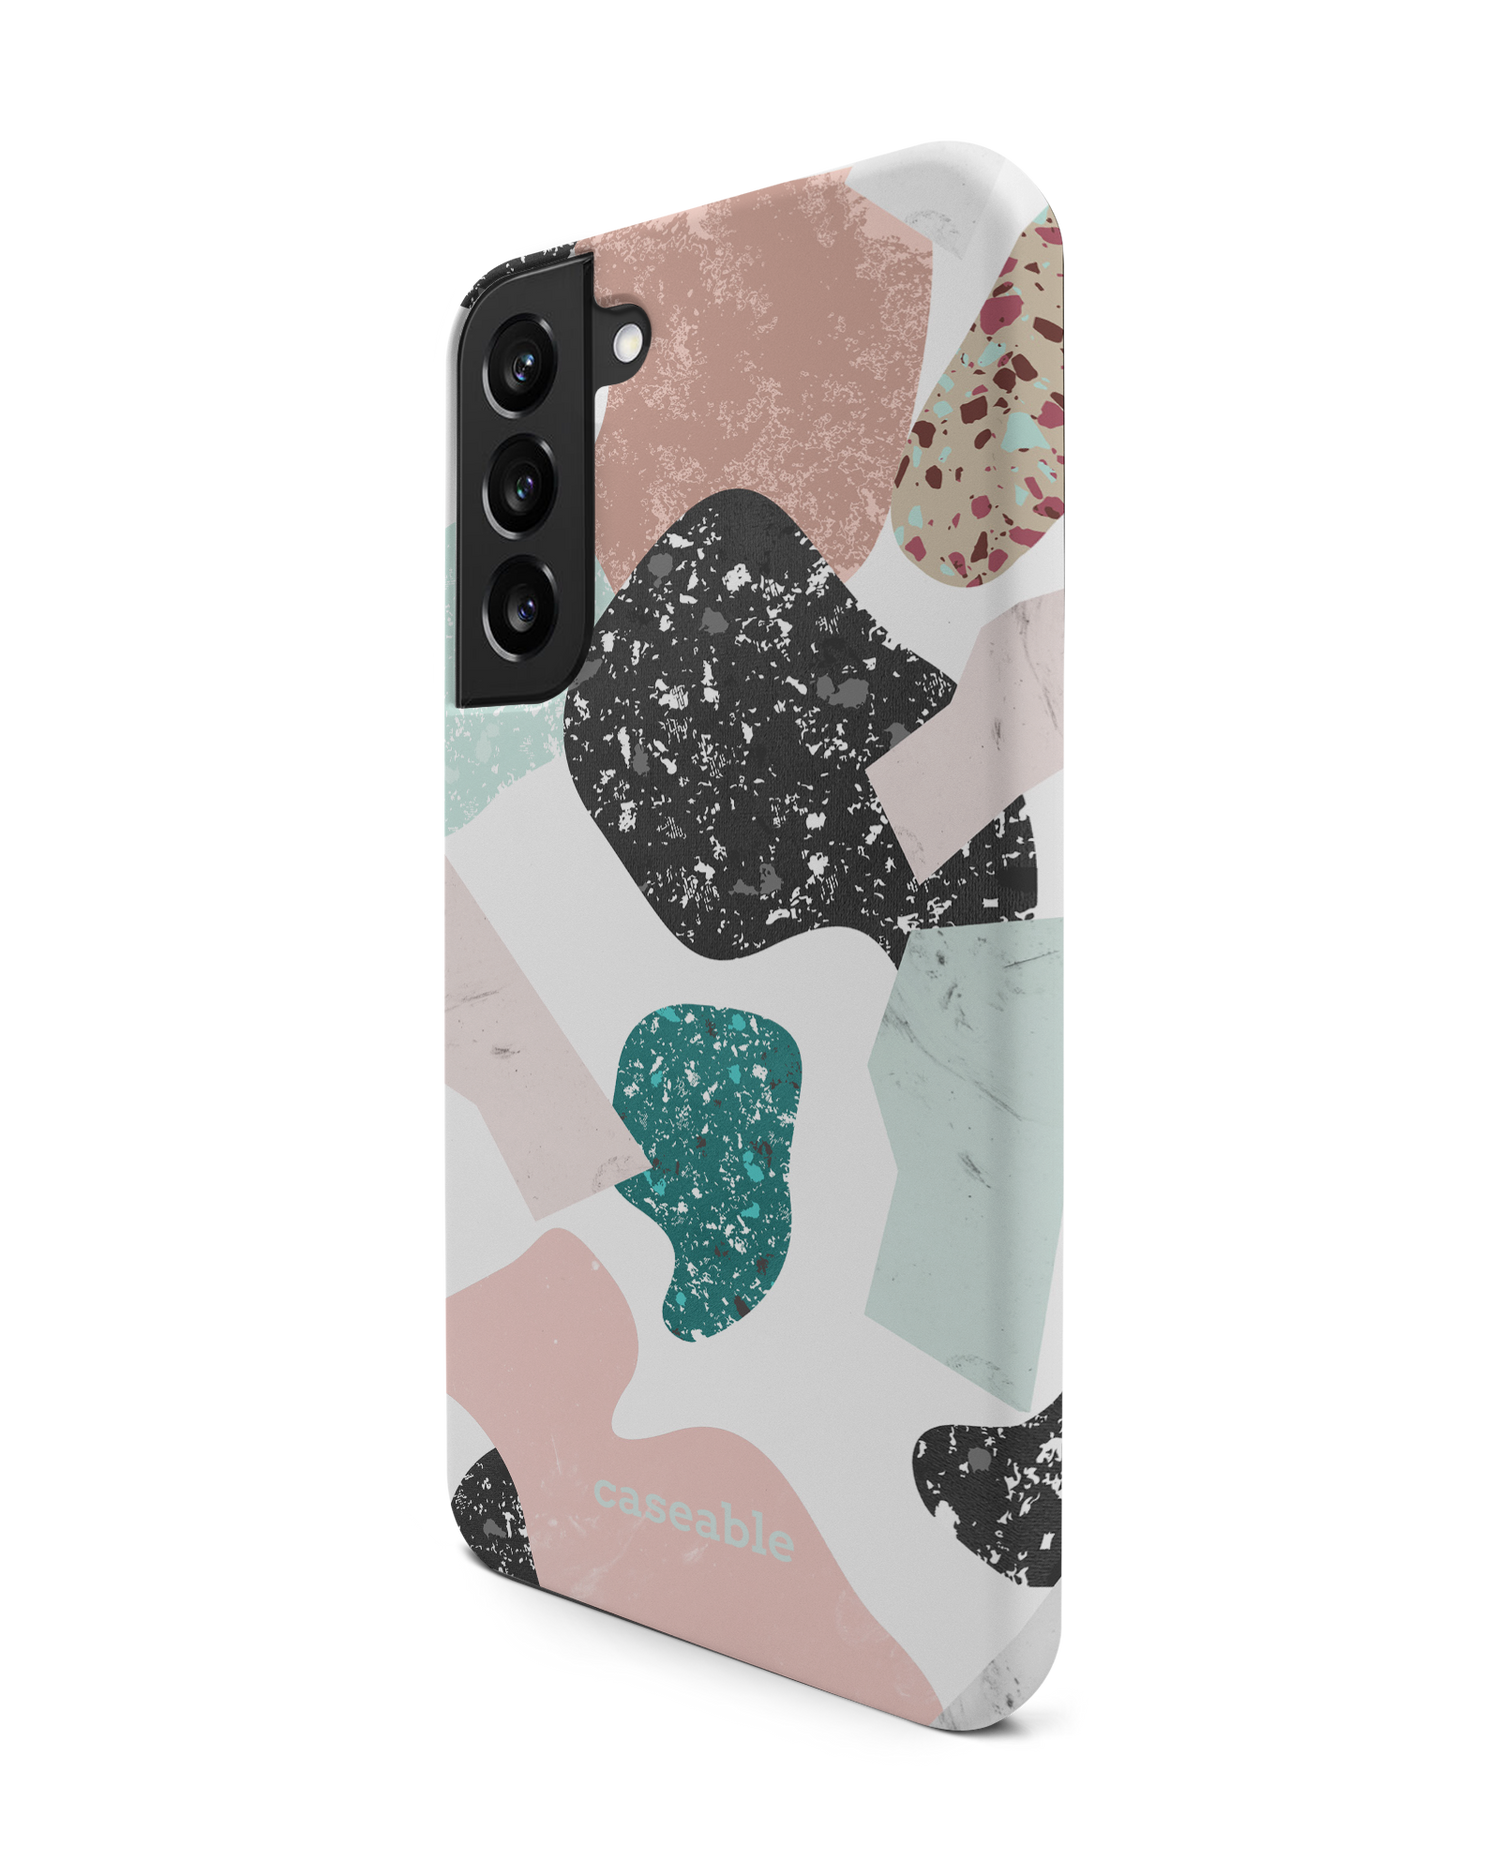 Scattered Shapes Premium Phone Case Samsung Galaxy S22 Plus 5G: View from the right side